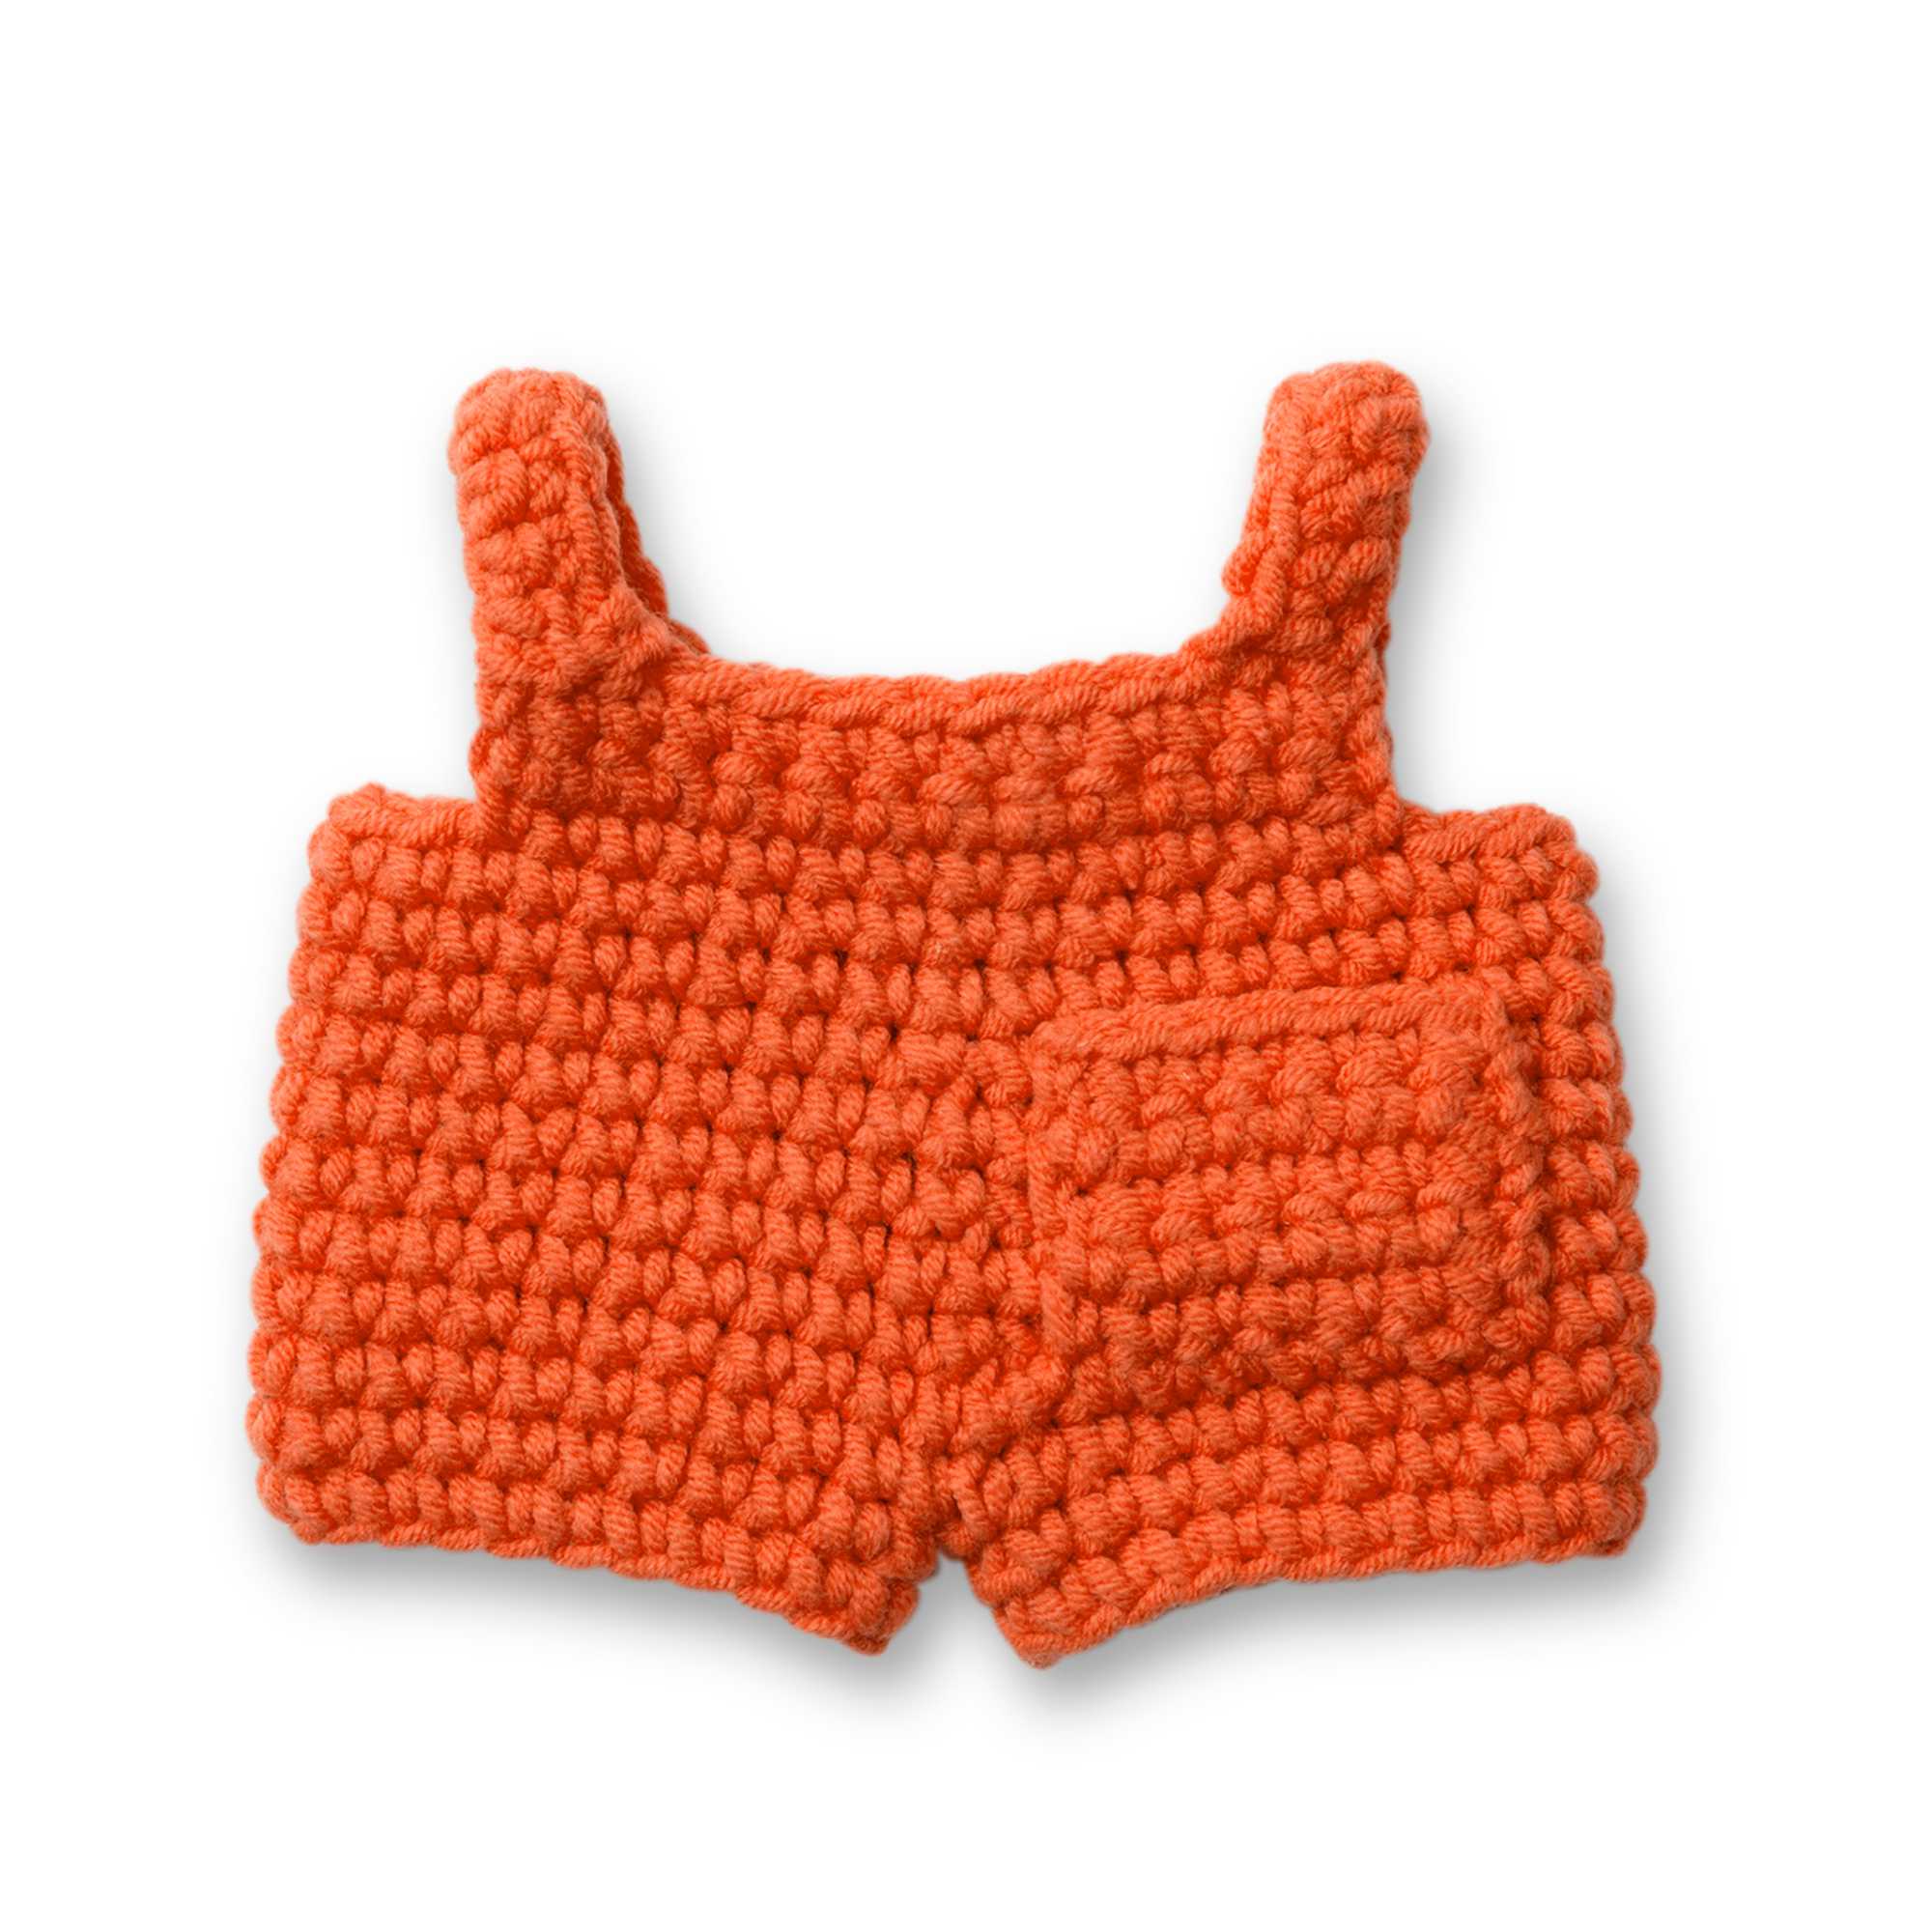 Just Dutch handmade crocheted outfit, Orange Overall